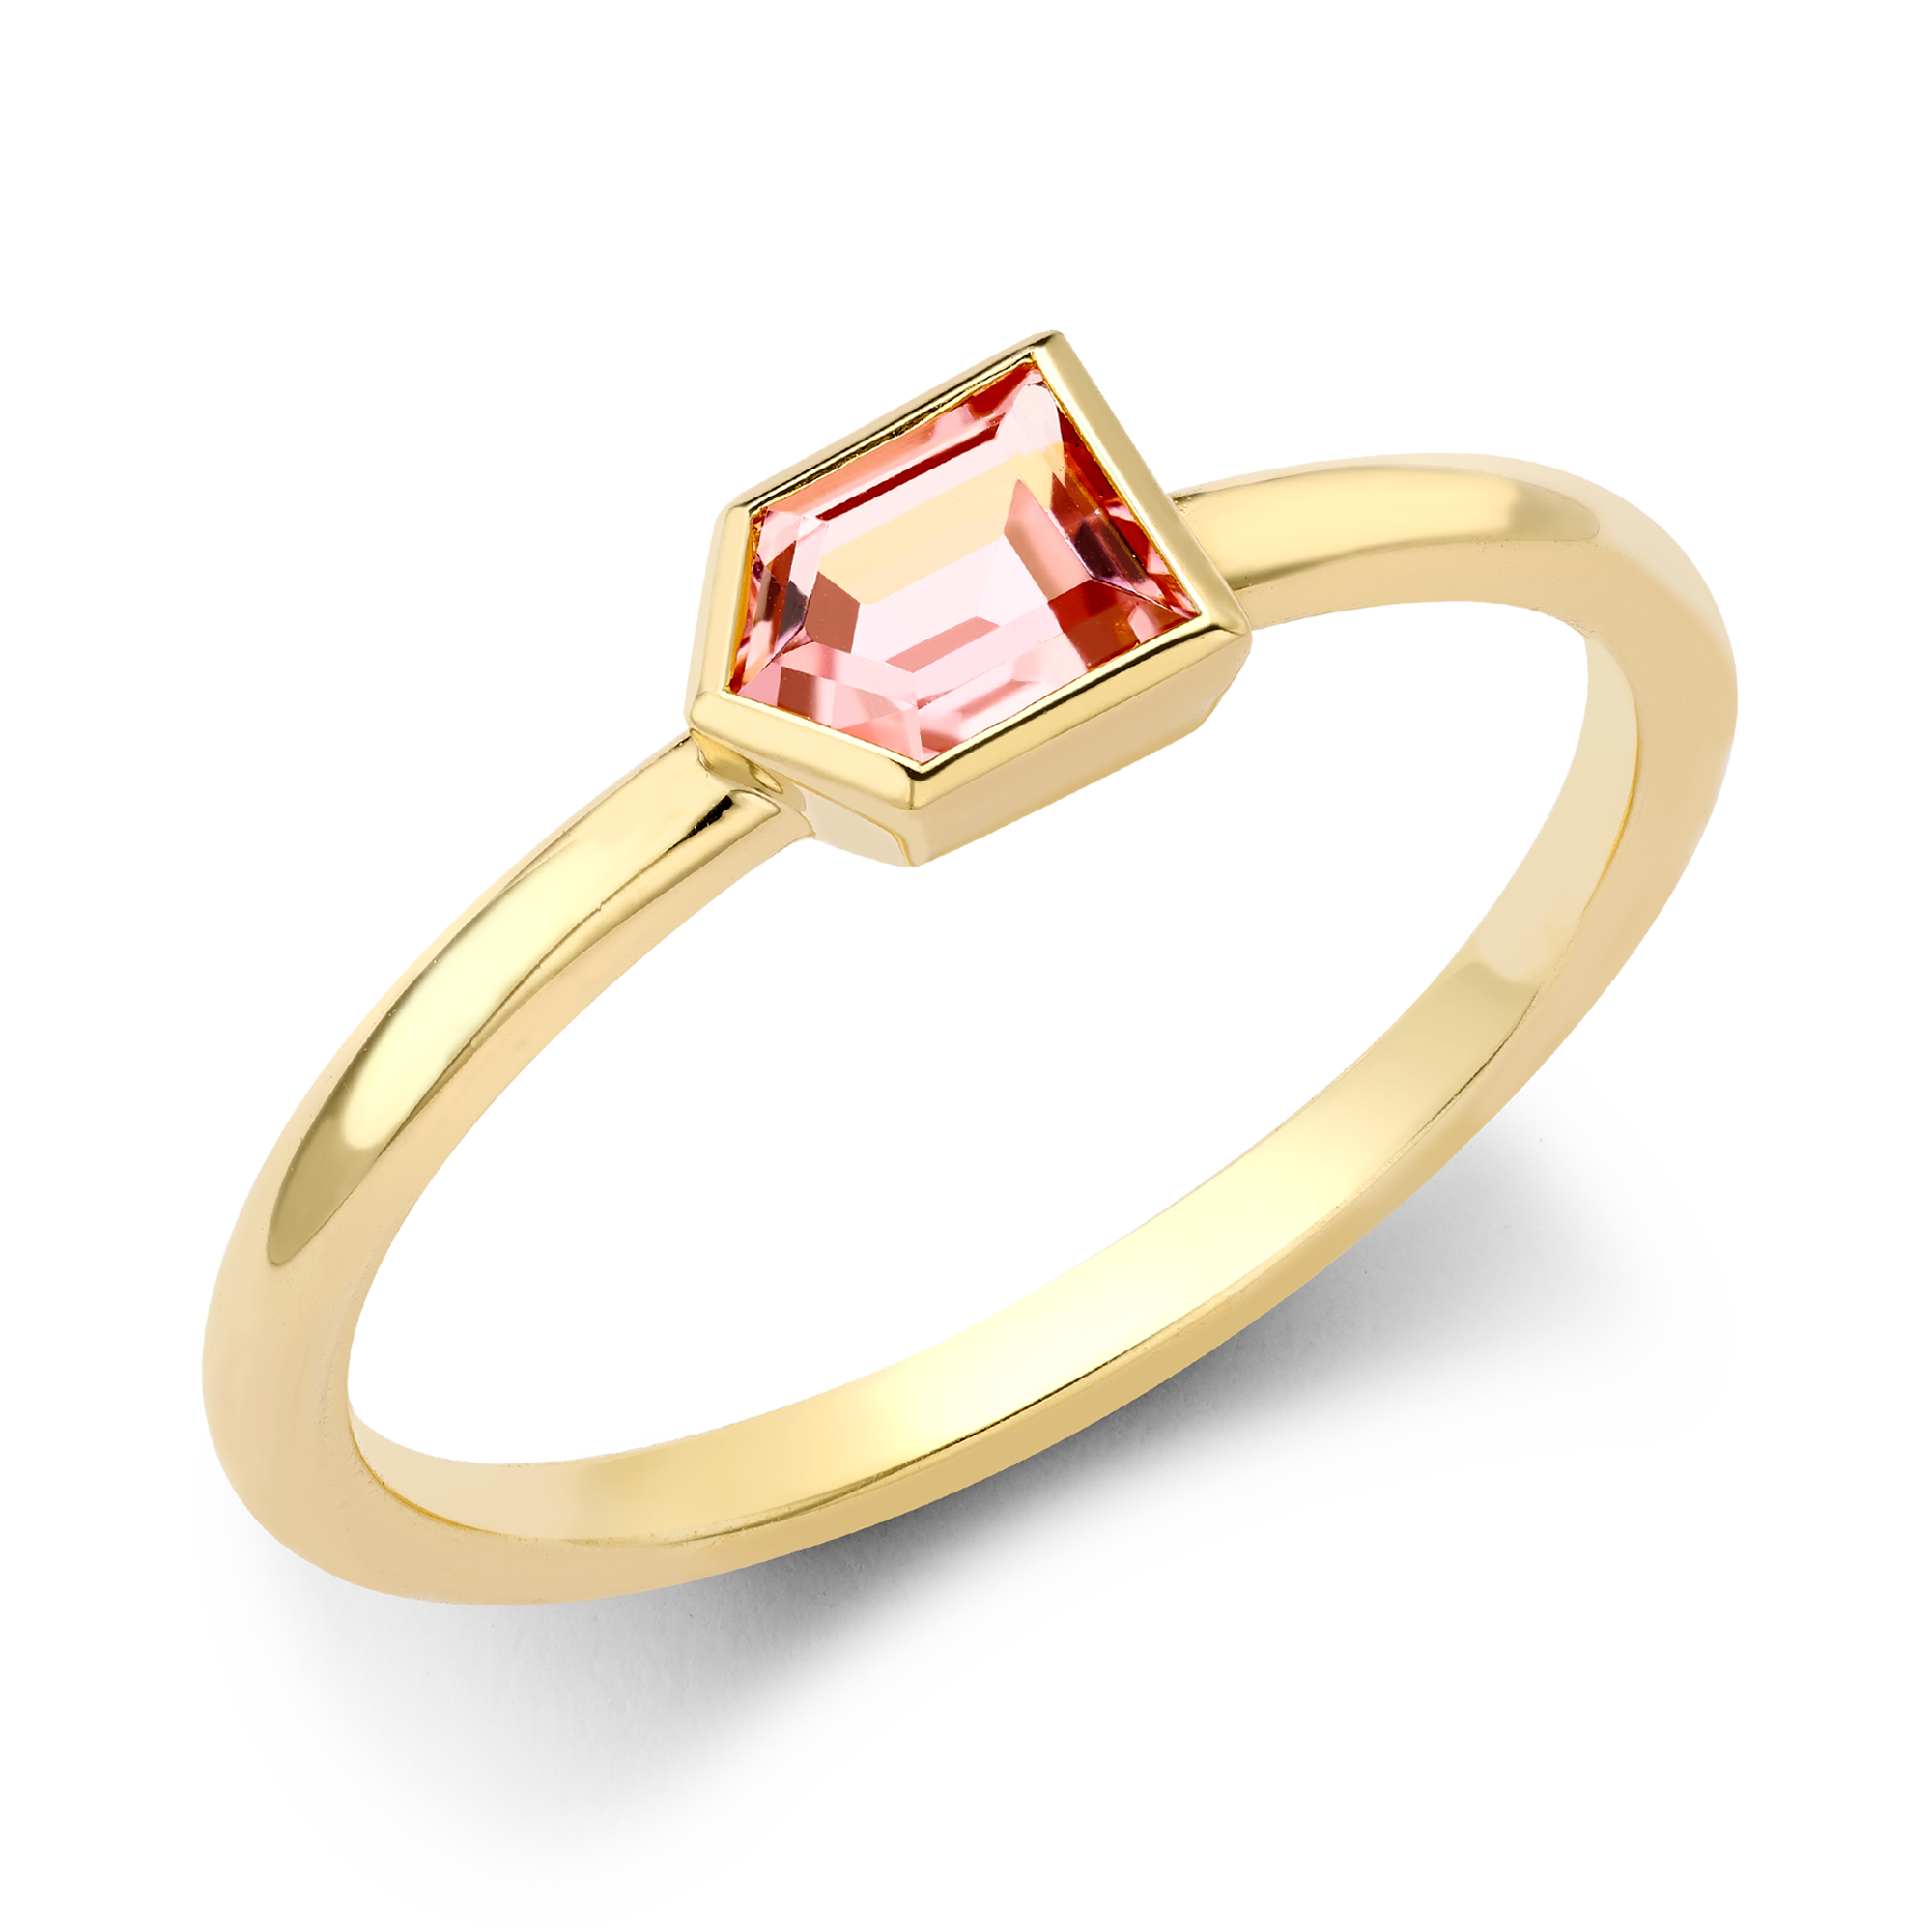 Lady Garden 0.42ct Pink Tourmaline Solitaire Ring Bullet Cut, Rubover Set_1